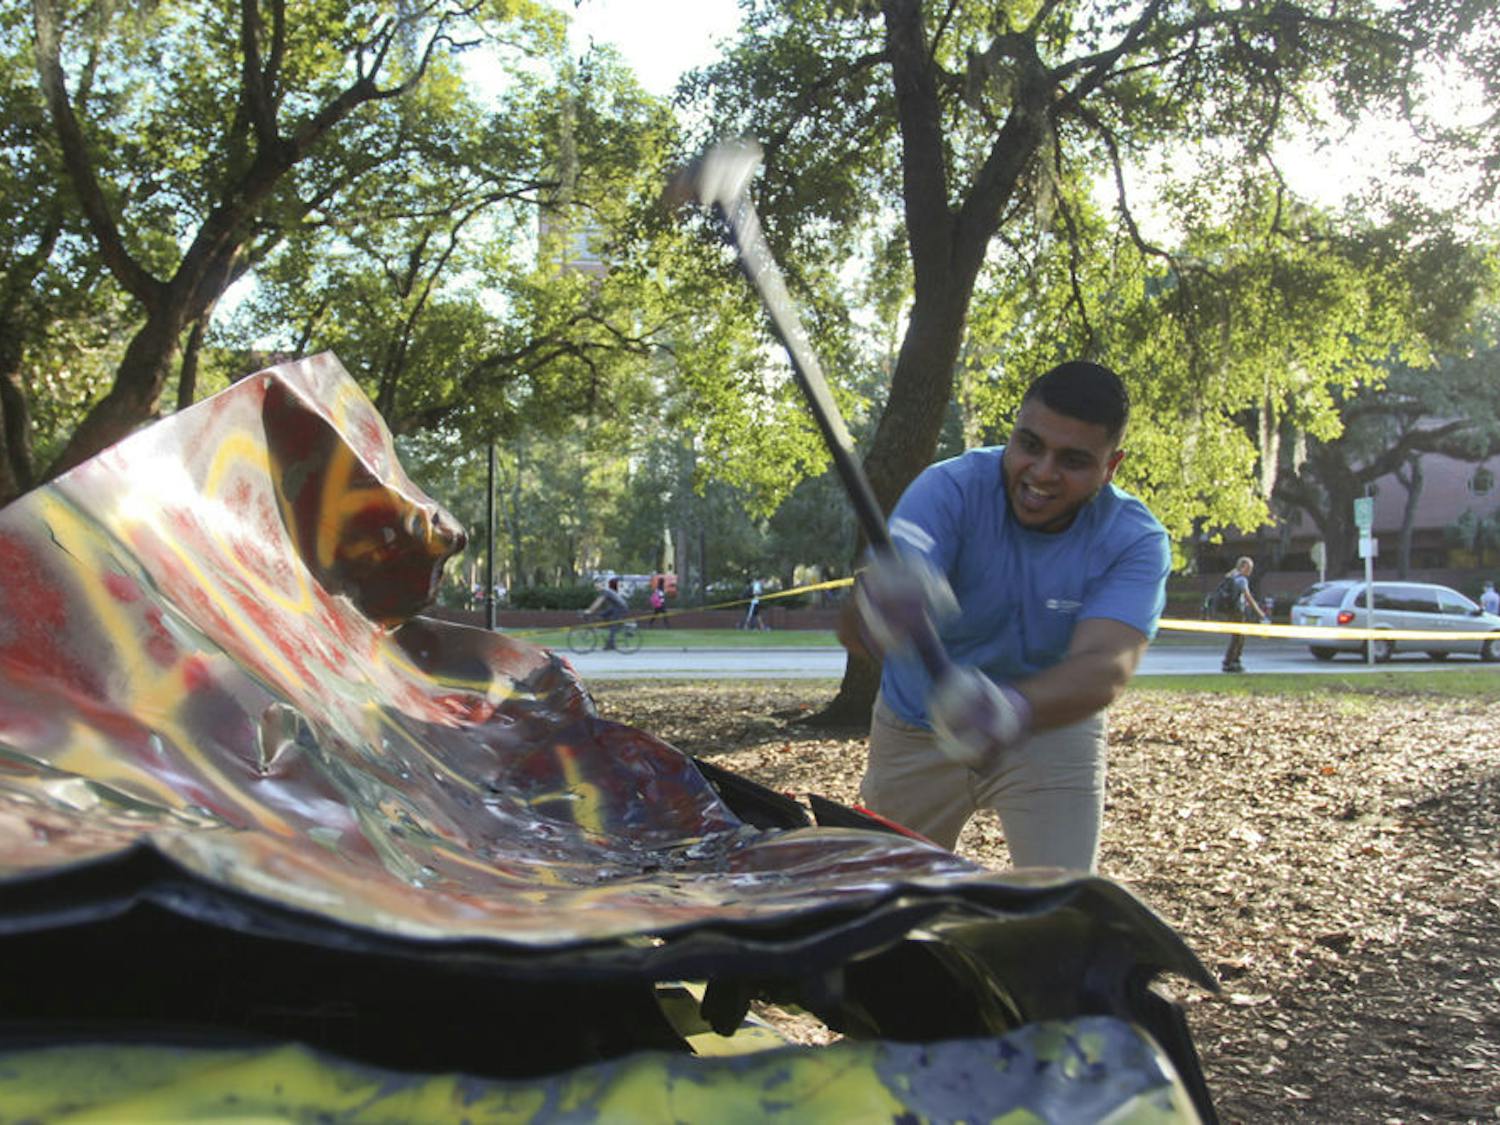 Mausam Trivedi, a 21-year-old UF hospitality junior and president of the Sigma Beta Rho Fraternity, takes a swing at an FSU-colored car during the SOS Smash fundraiser.